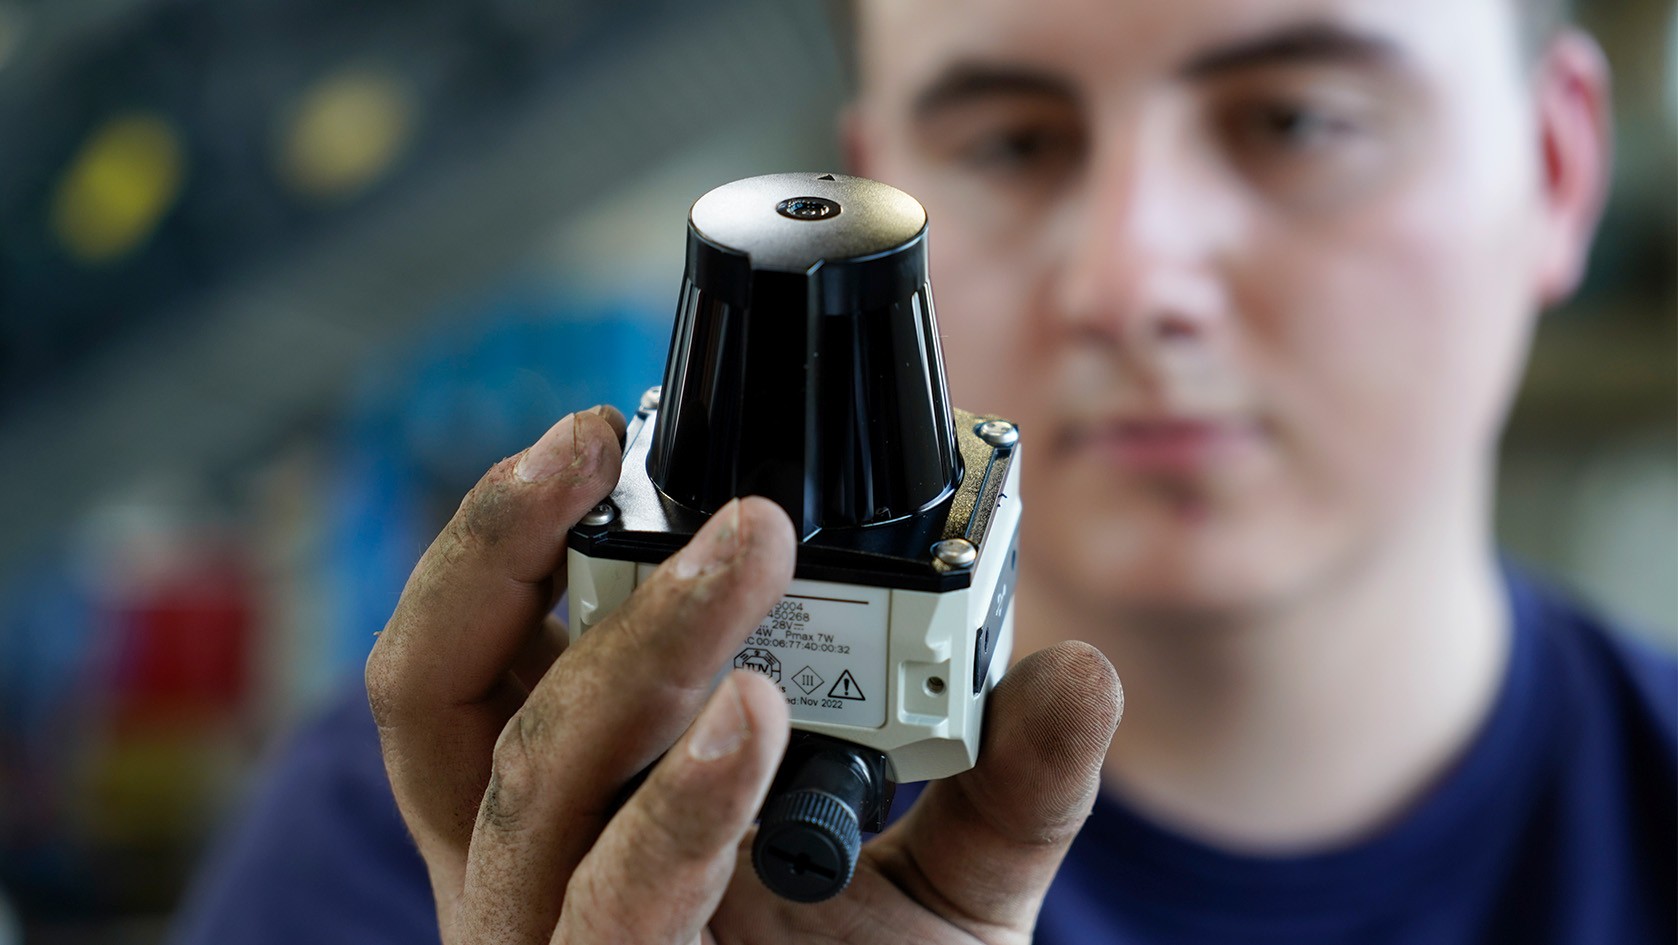 A man holds a component for the WPT retrofit in his hand